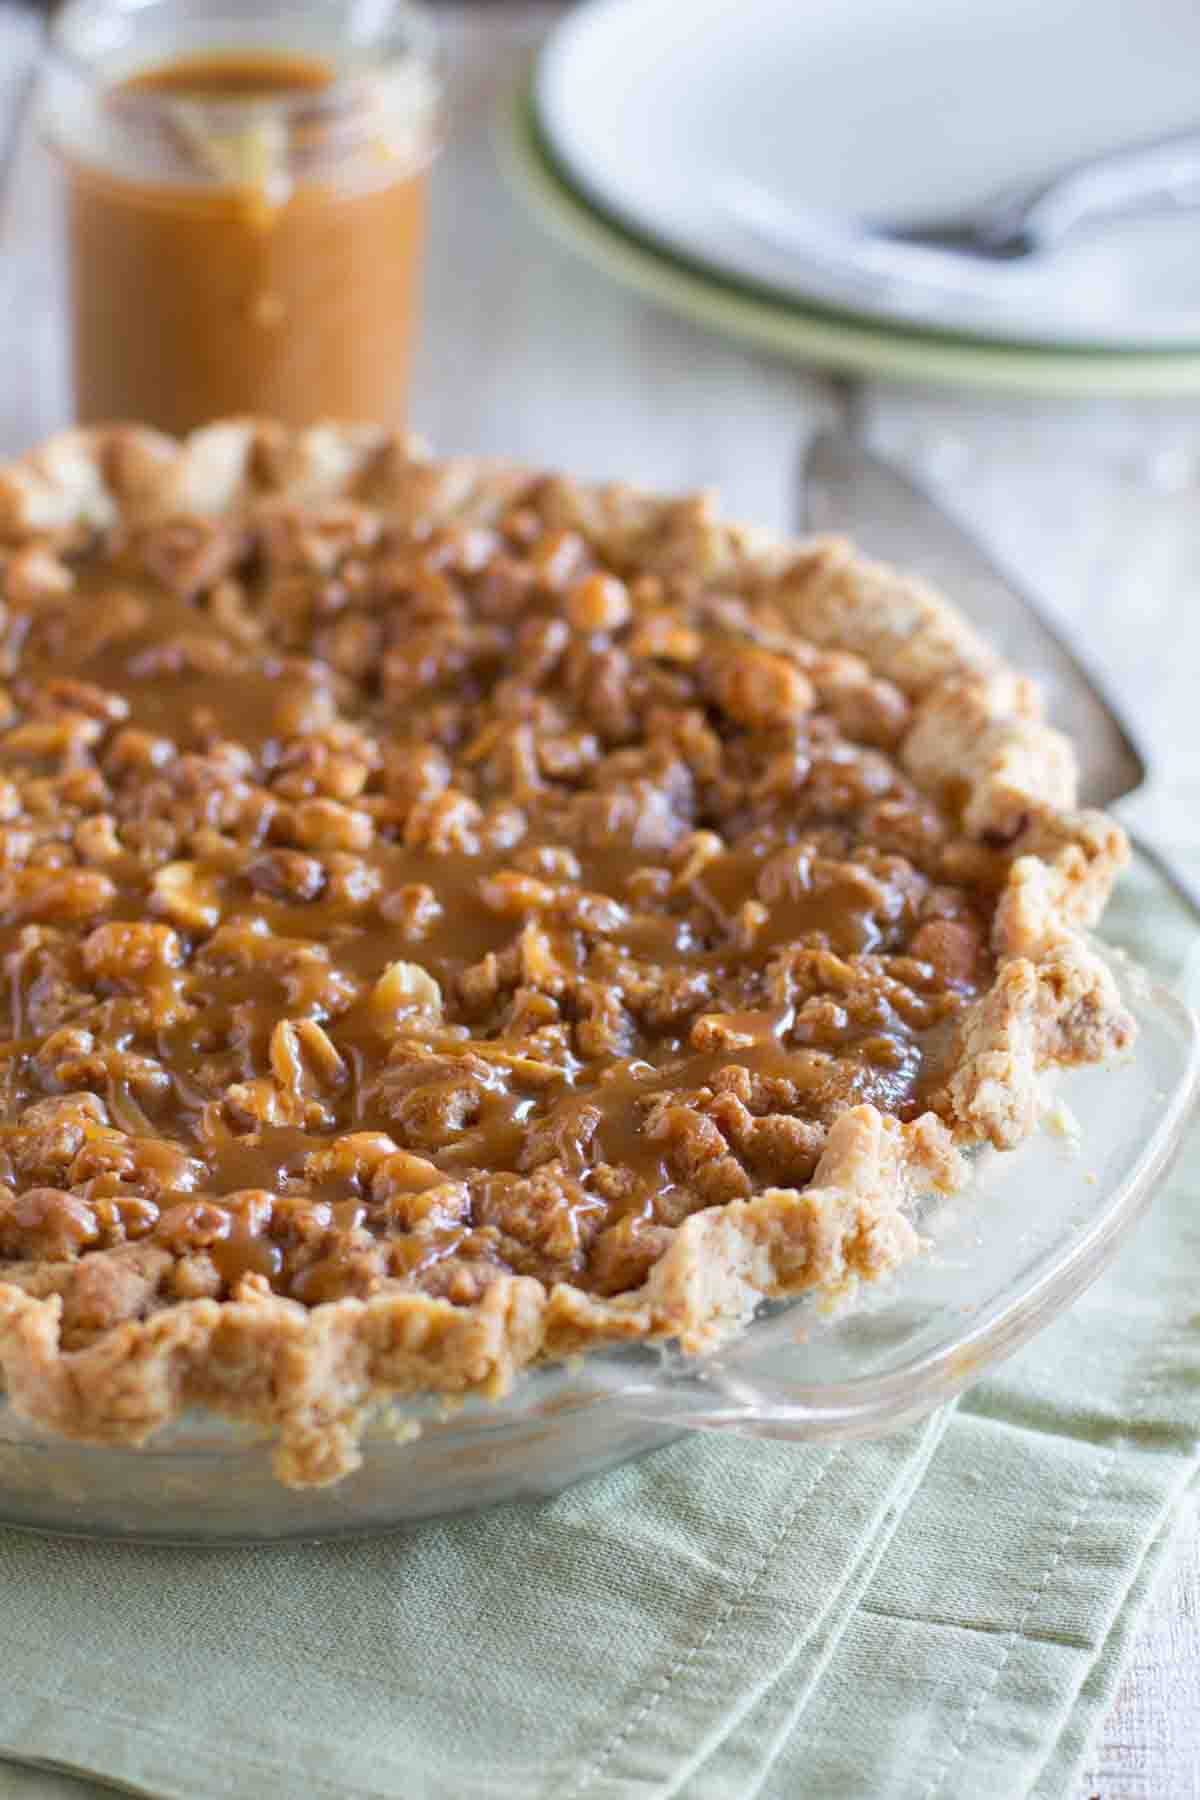 Peanut Butter Fudge Pie topped with salted peanut butter caramel in a pie dish